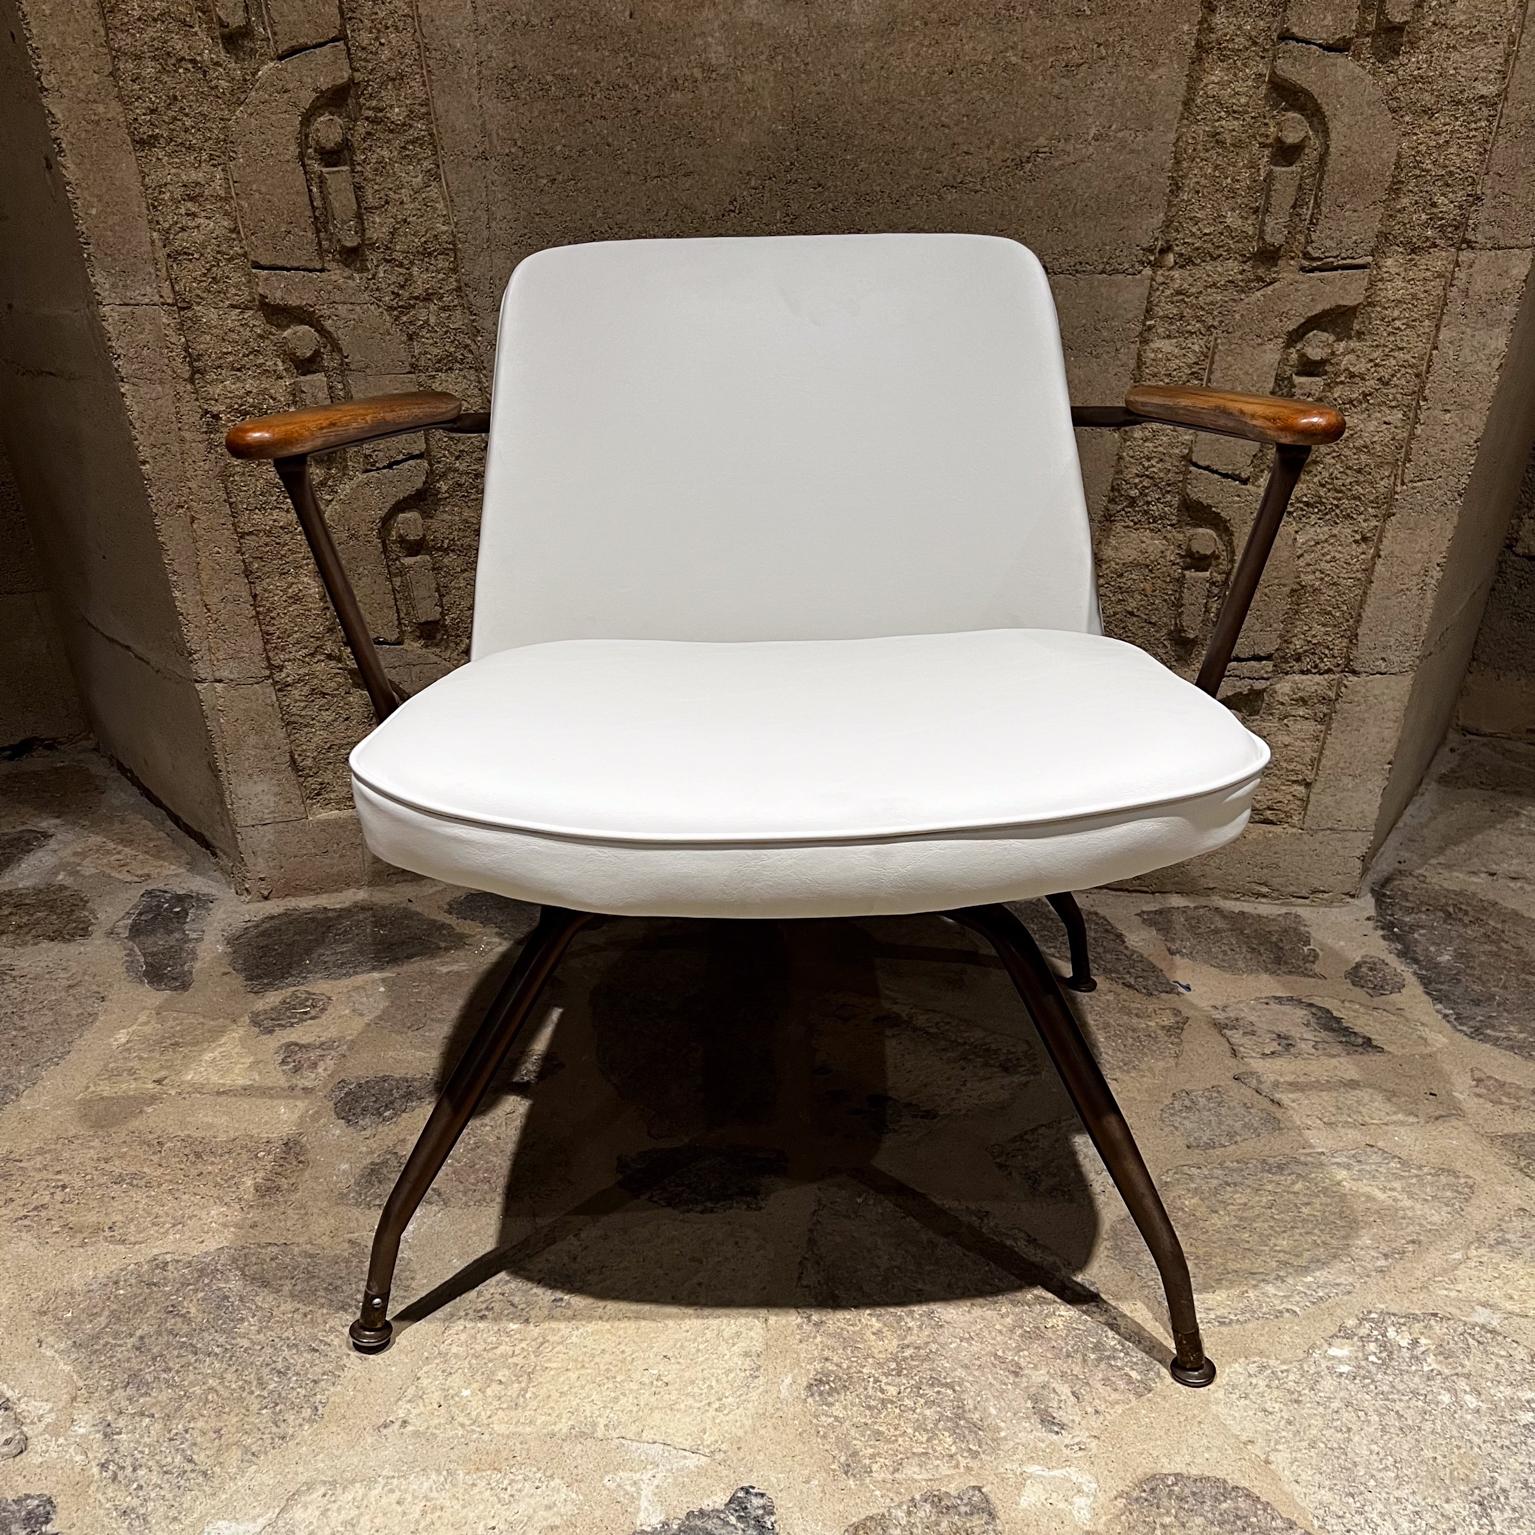 1950s Fabulous White Swivel Chair 
after Viko Baumritter
Stamped MODEL19 May 1959 Memphis Tenn
27.5 h x 27.5 w x 25.25 d seat15.25 h arm rest 23 h
Original unrestored vintage condition
See all images provided.
Delivery to LA PS OC